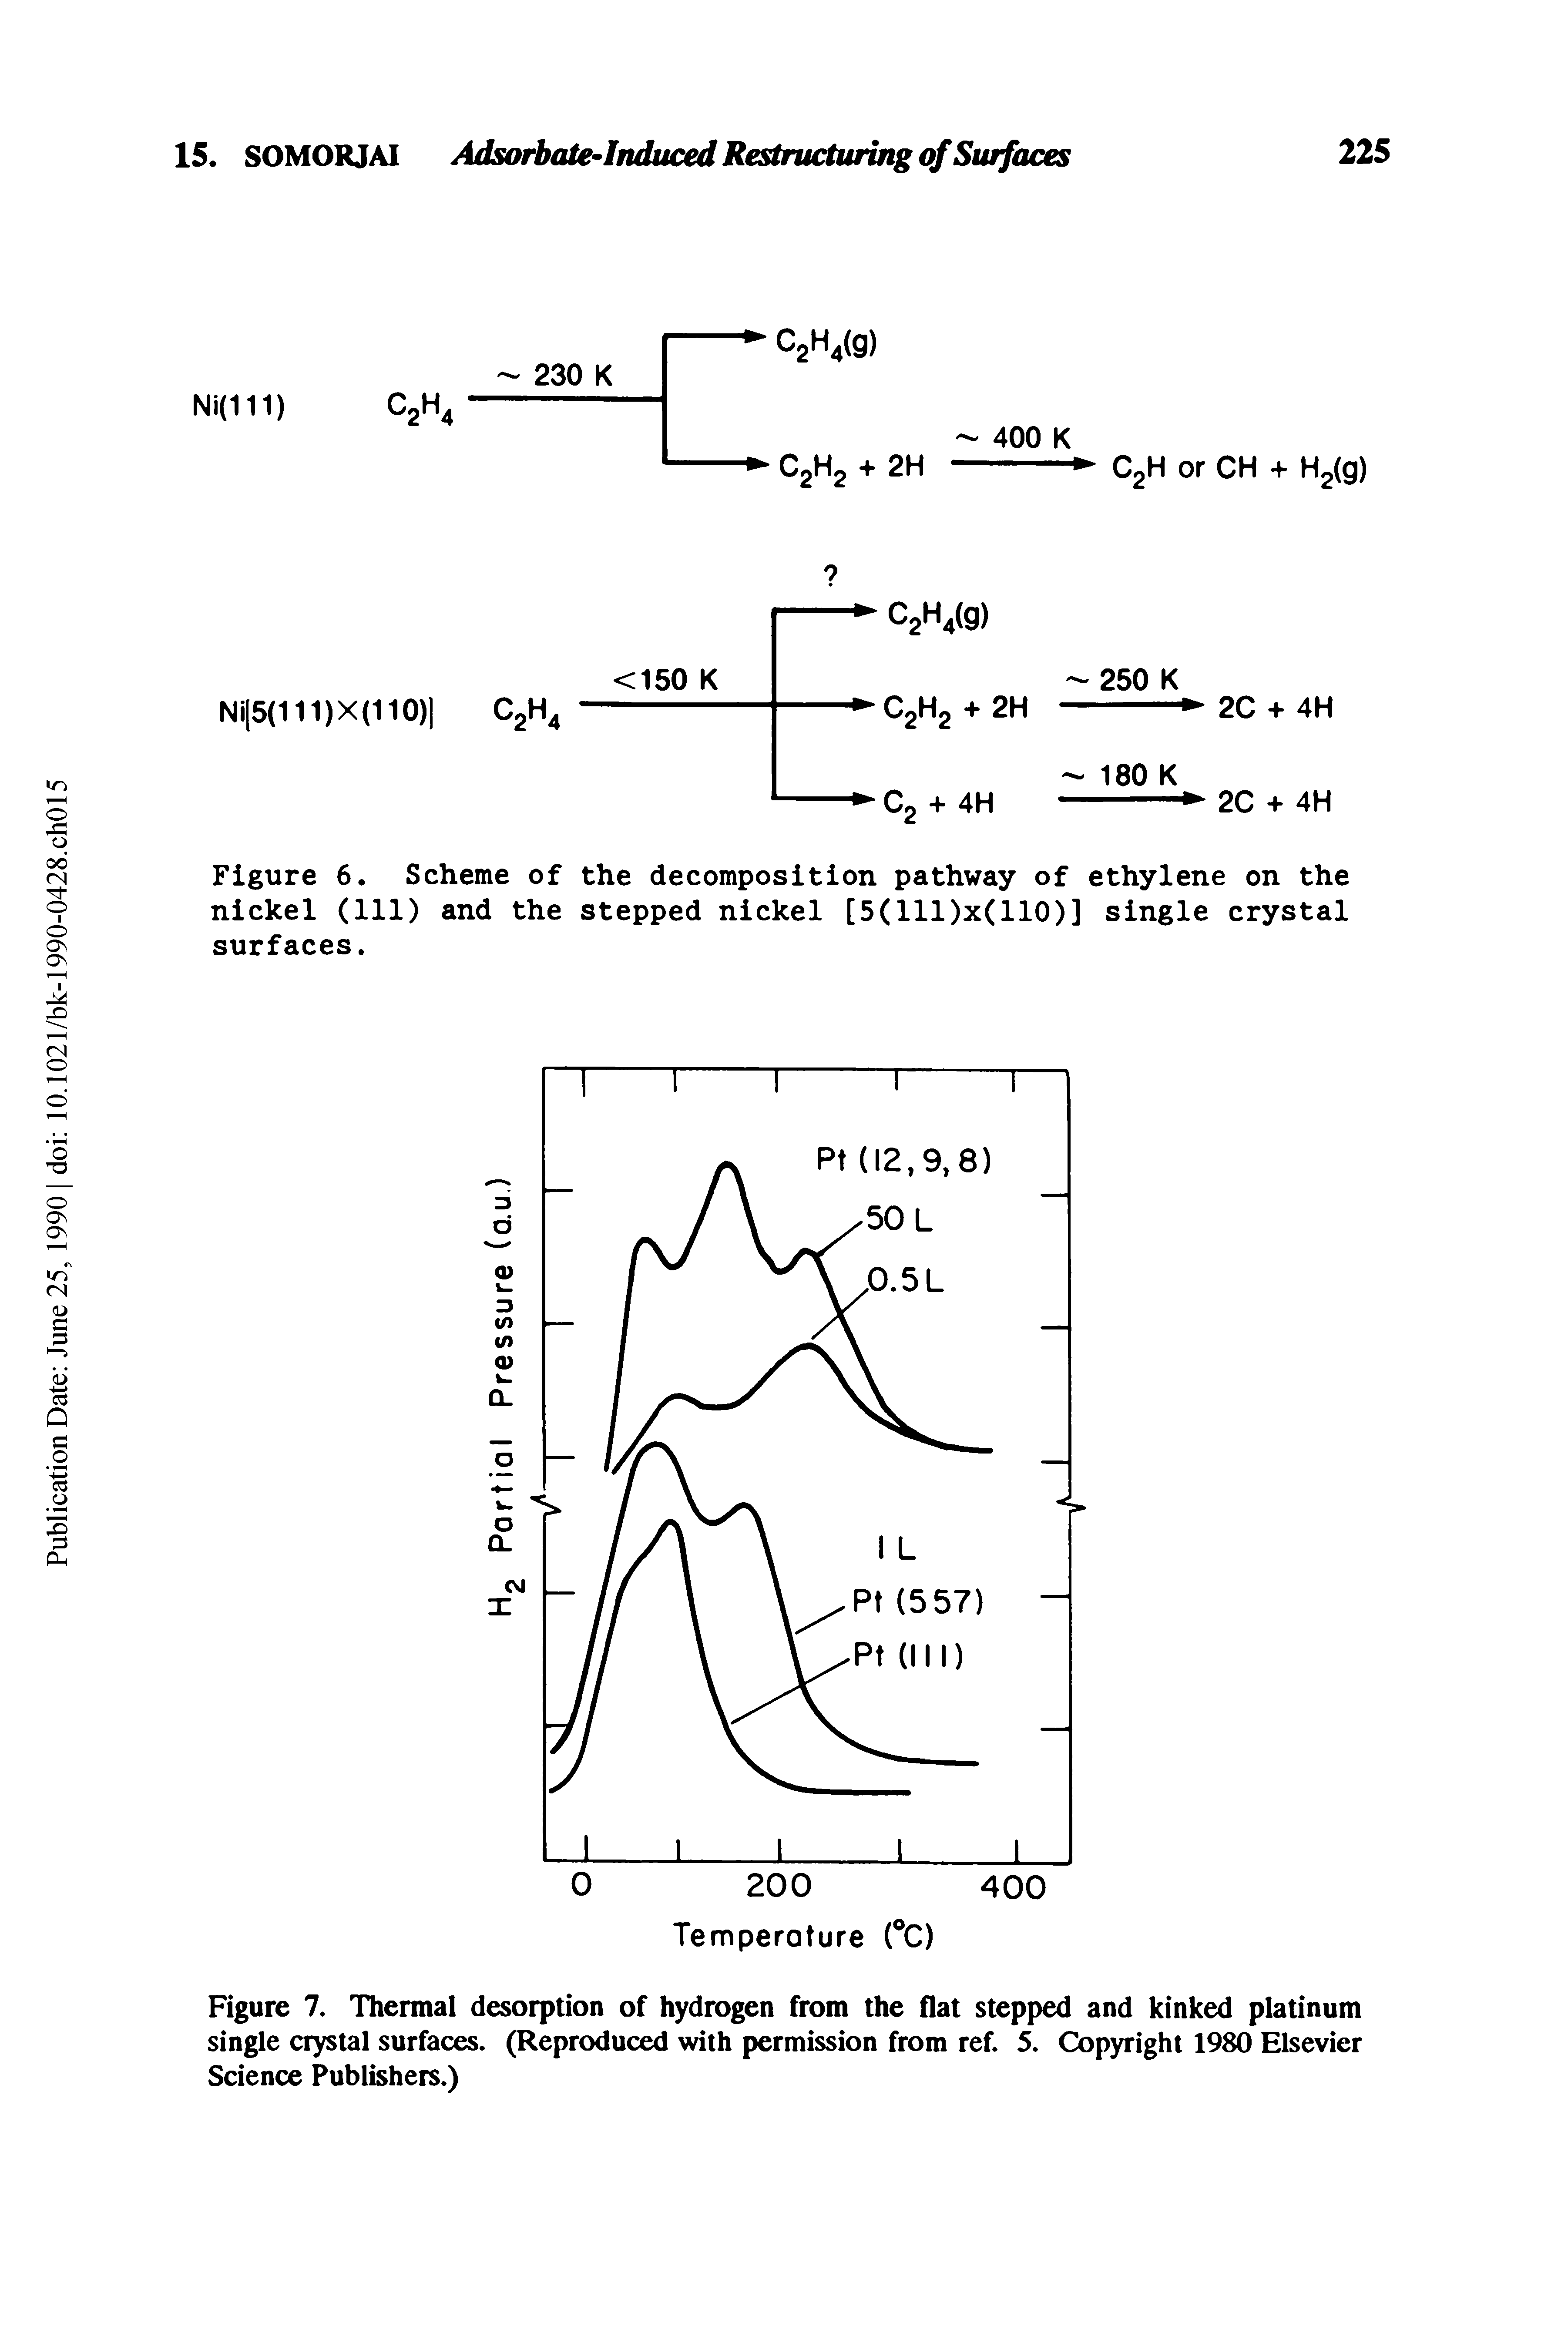 Figure 7. Thermal desorption of hydrogen from the flat stepped and kinked platinum single crystal surfaces. (Reproduced with permission from ref. 5. Copyright 1980 Elsevier Science Publishers.)...